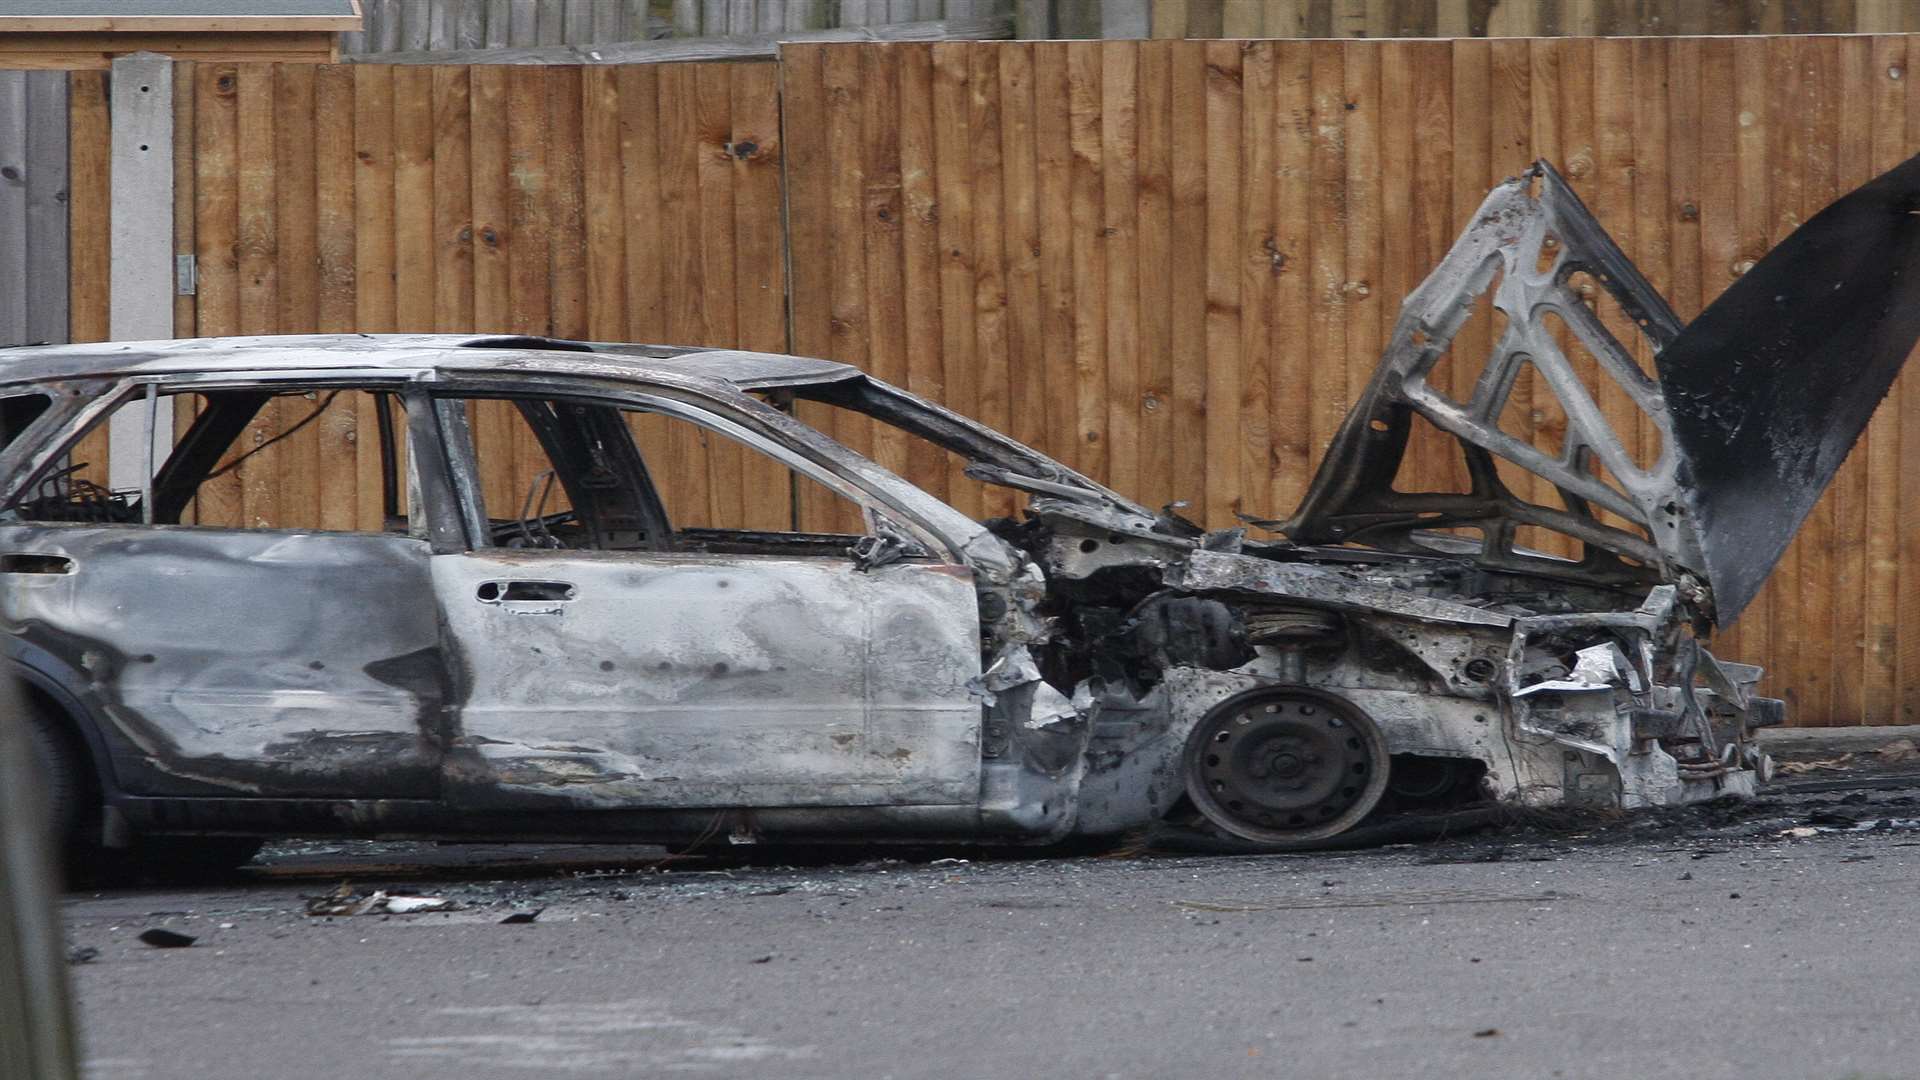 The charred remains of Vicky's car. Picture: The Sun/Gary Stone